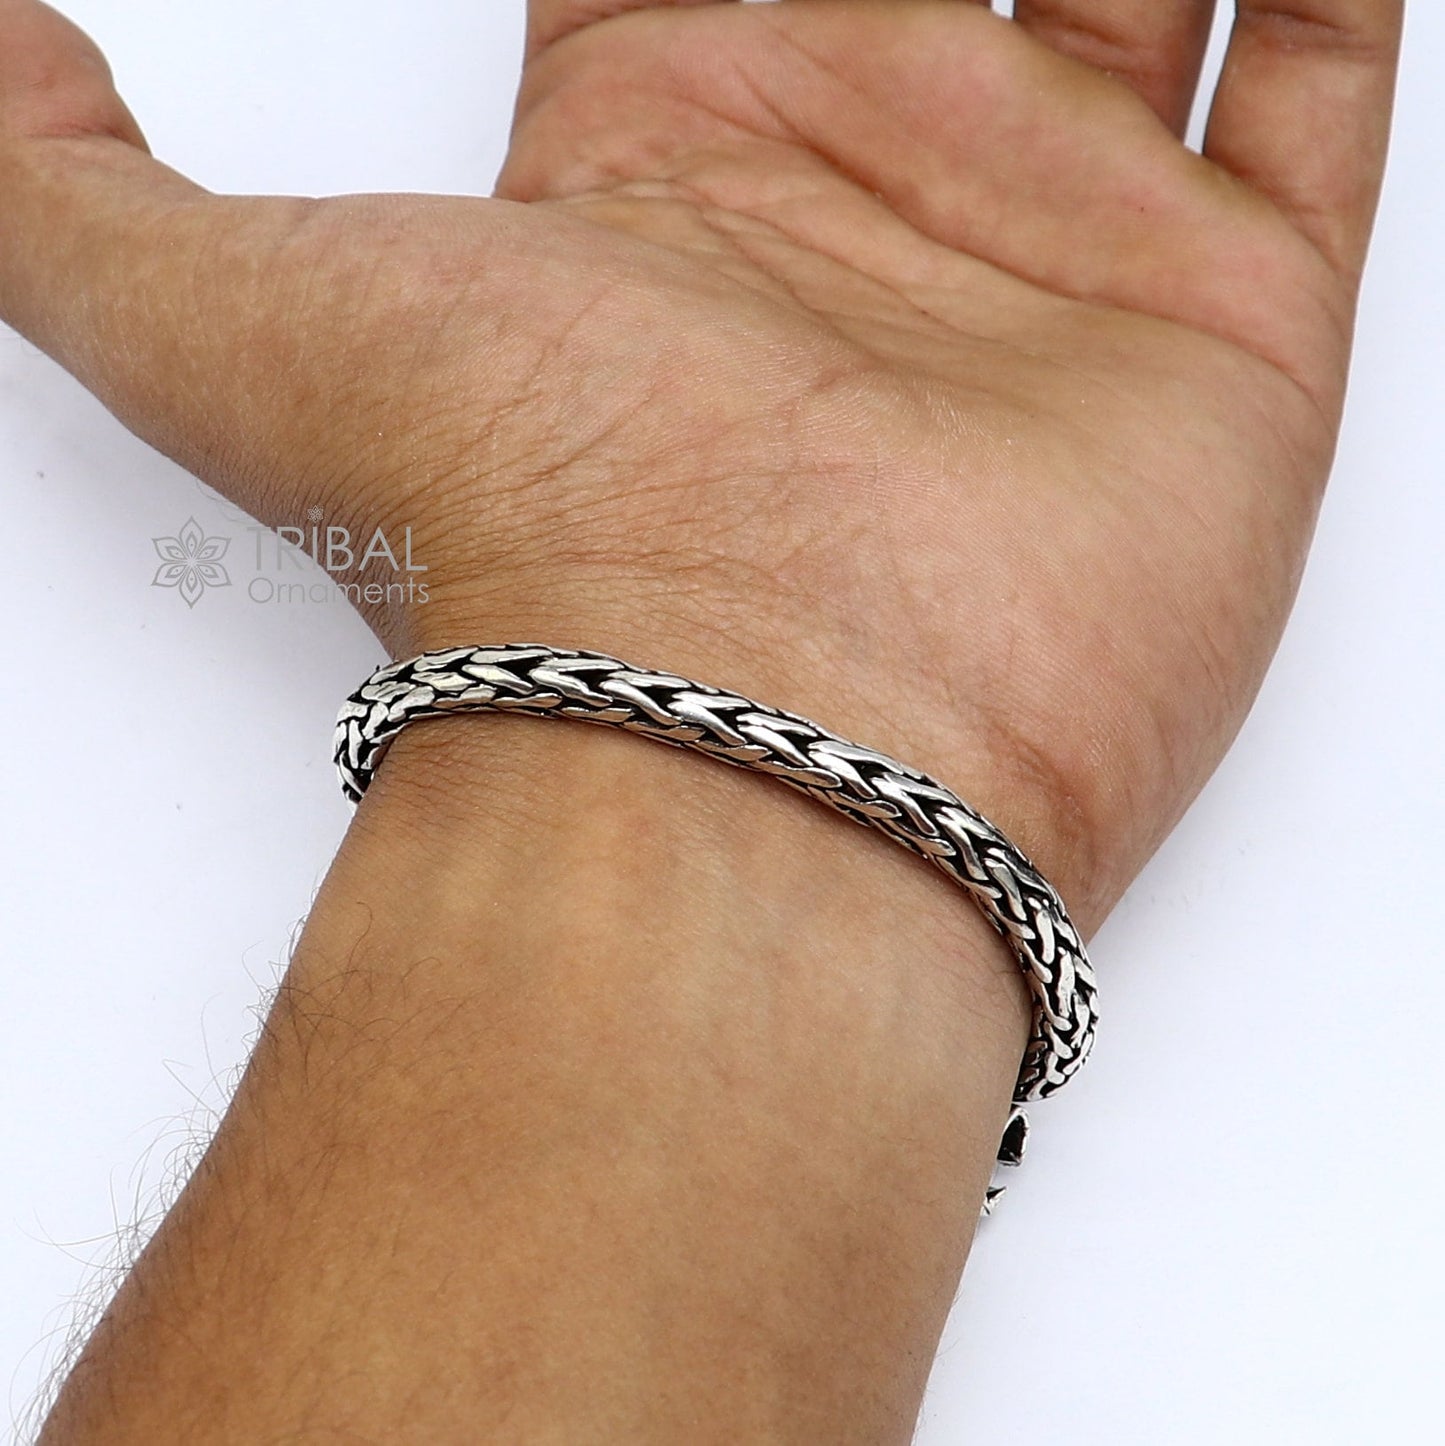 8" inches 925 sterling silver handmade stylish oxidized wheat chain bracelet customized design gorgeous personalized gifting jewelry sbr704 - TRIBAL ORNAMENTS